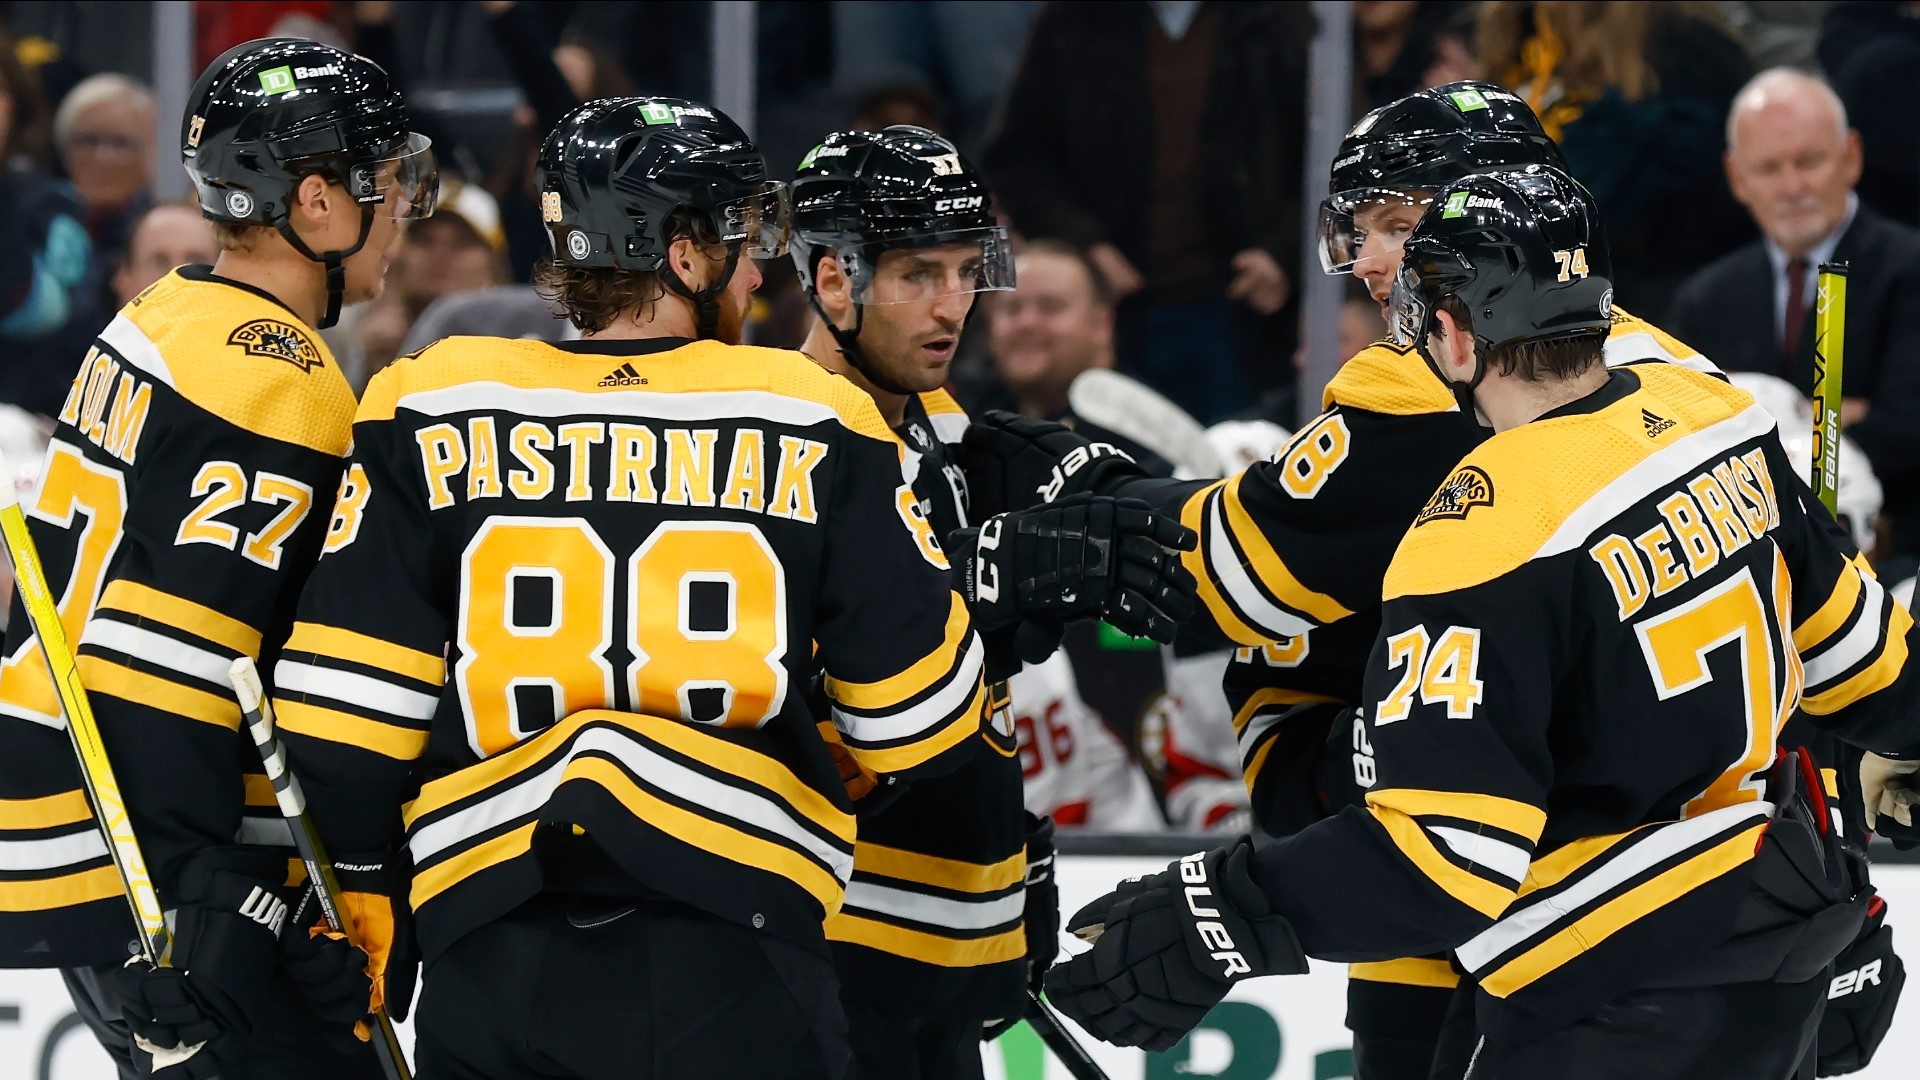 Captain Patrice Bergeron also scored, and Boston beat the Washington Capitals 5-2 on Wednesday night to give Jim Montgomery a victory in his Bruins coaching debut.